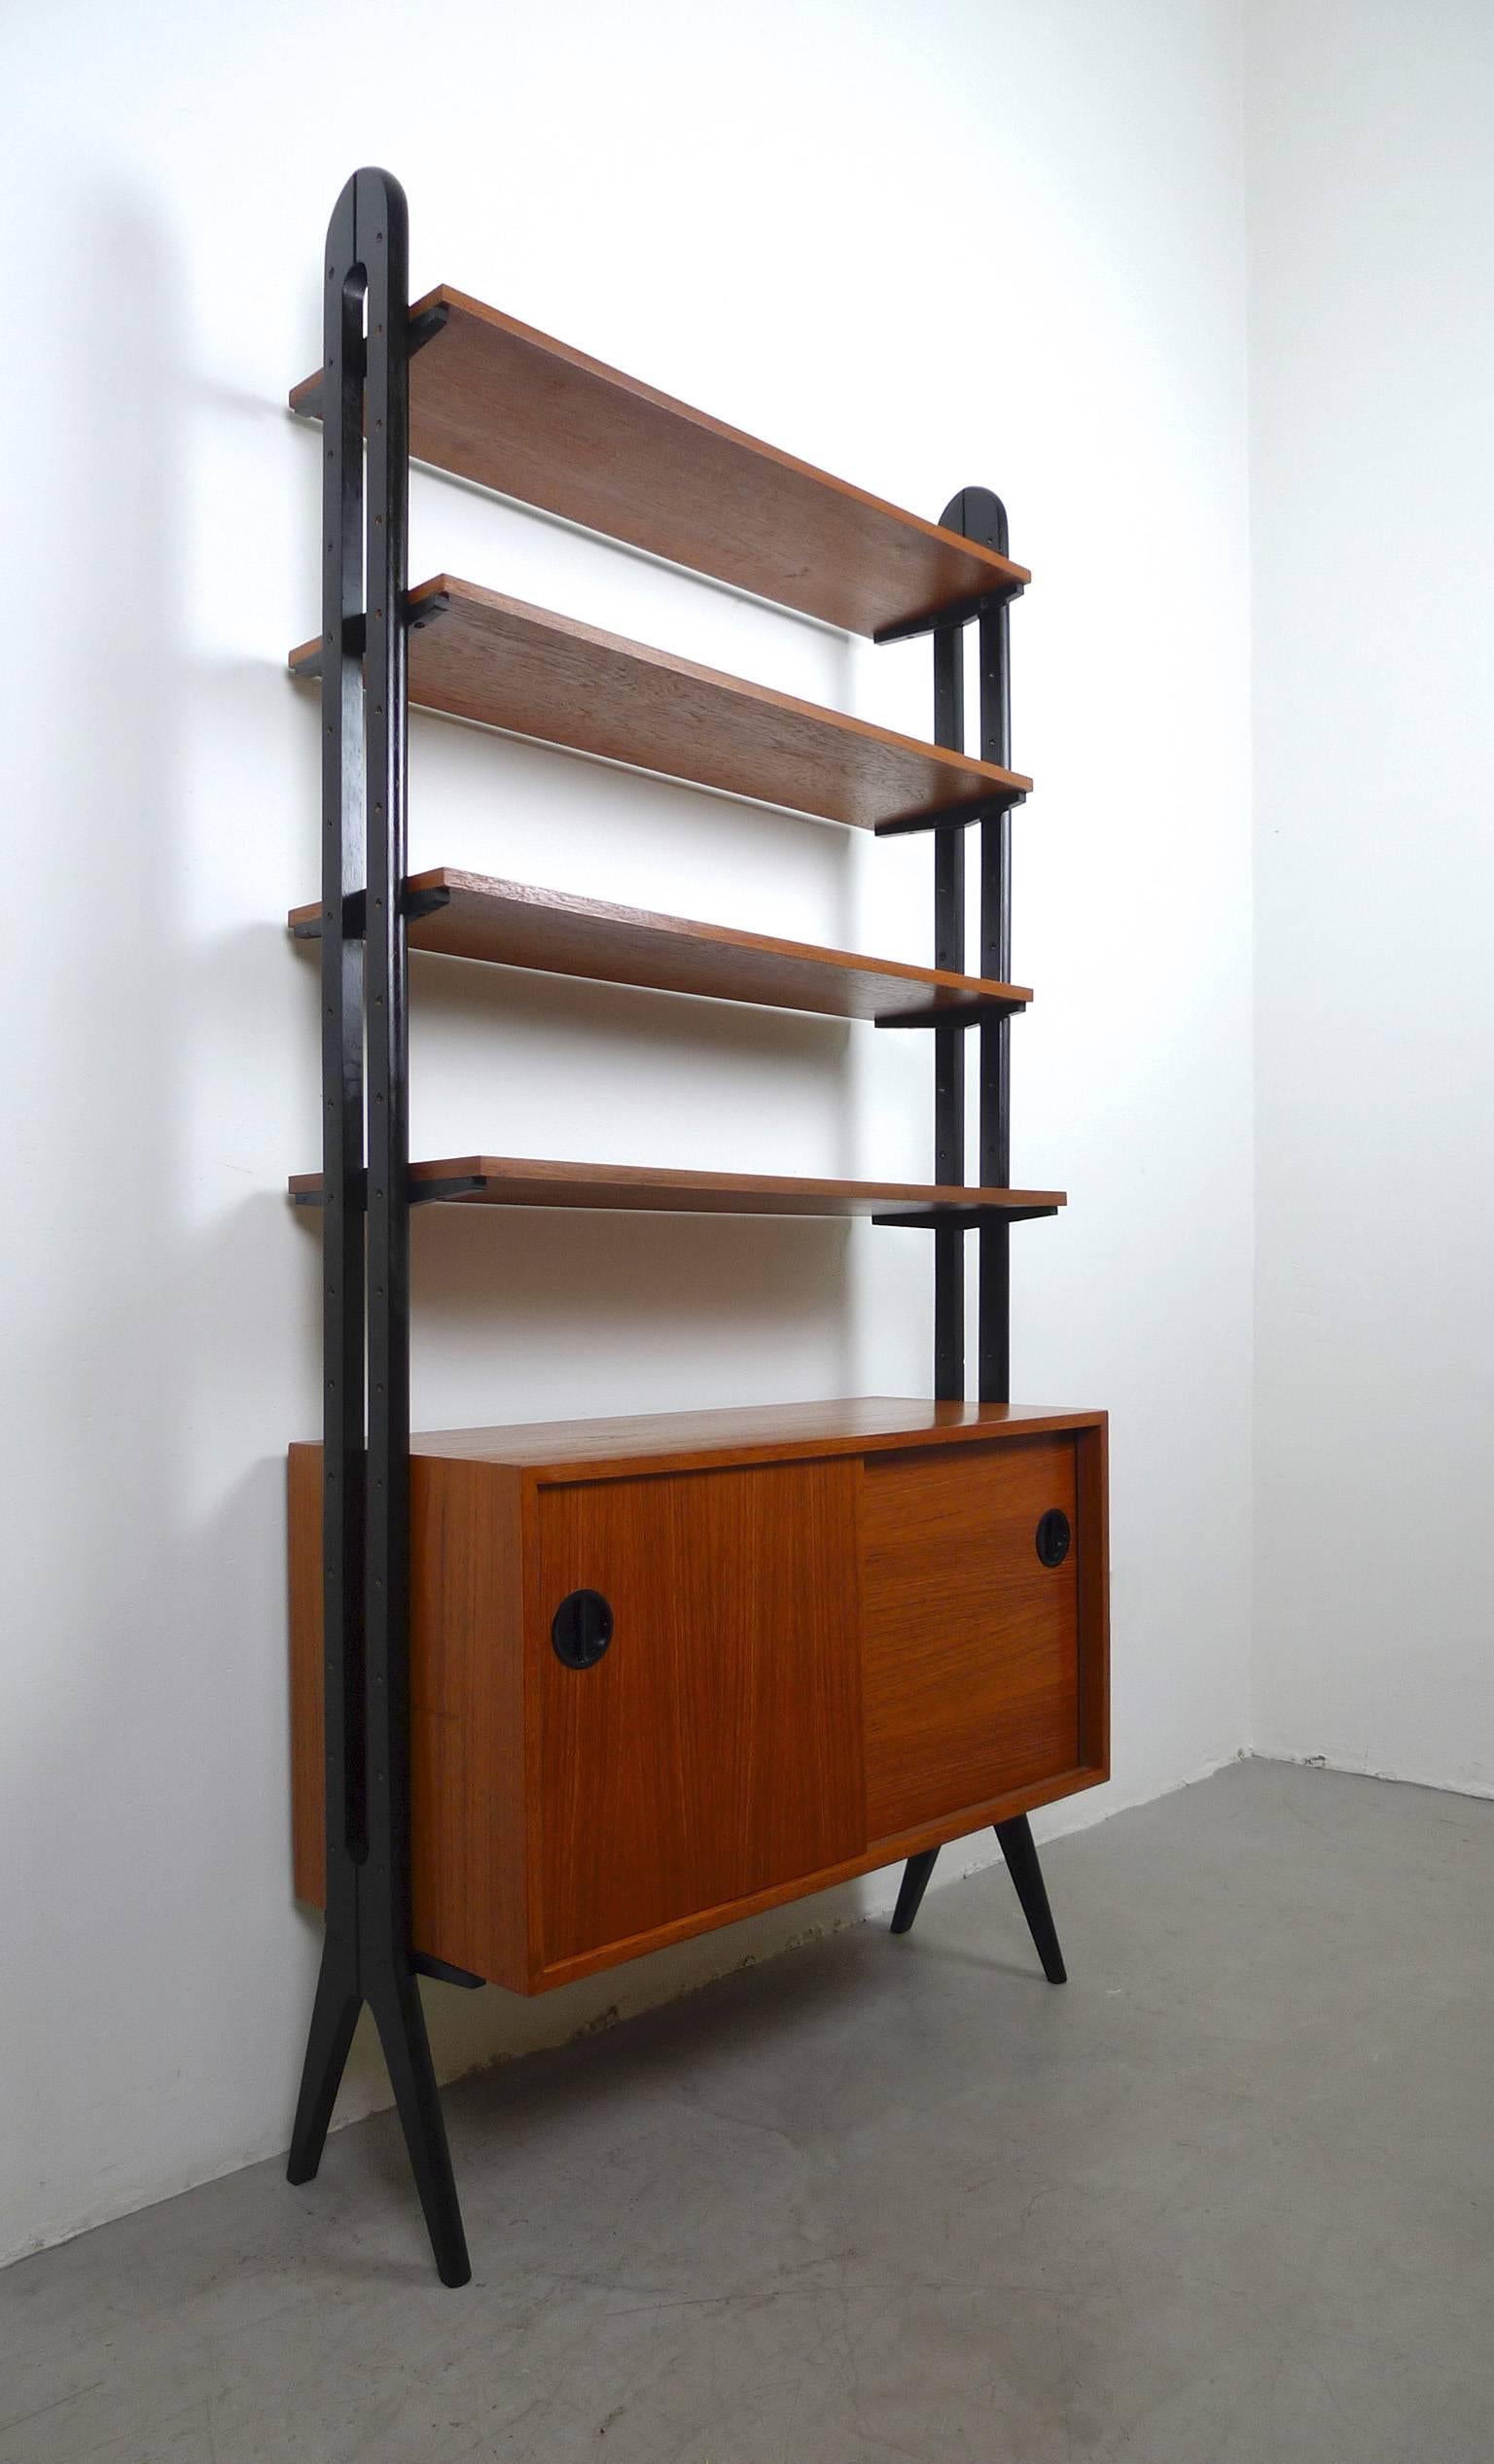 Lacquered 1950s Teak Shelf with Box and Boards from Denmark